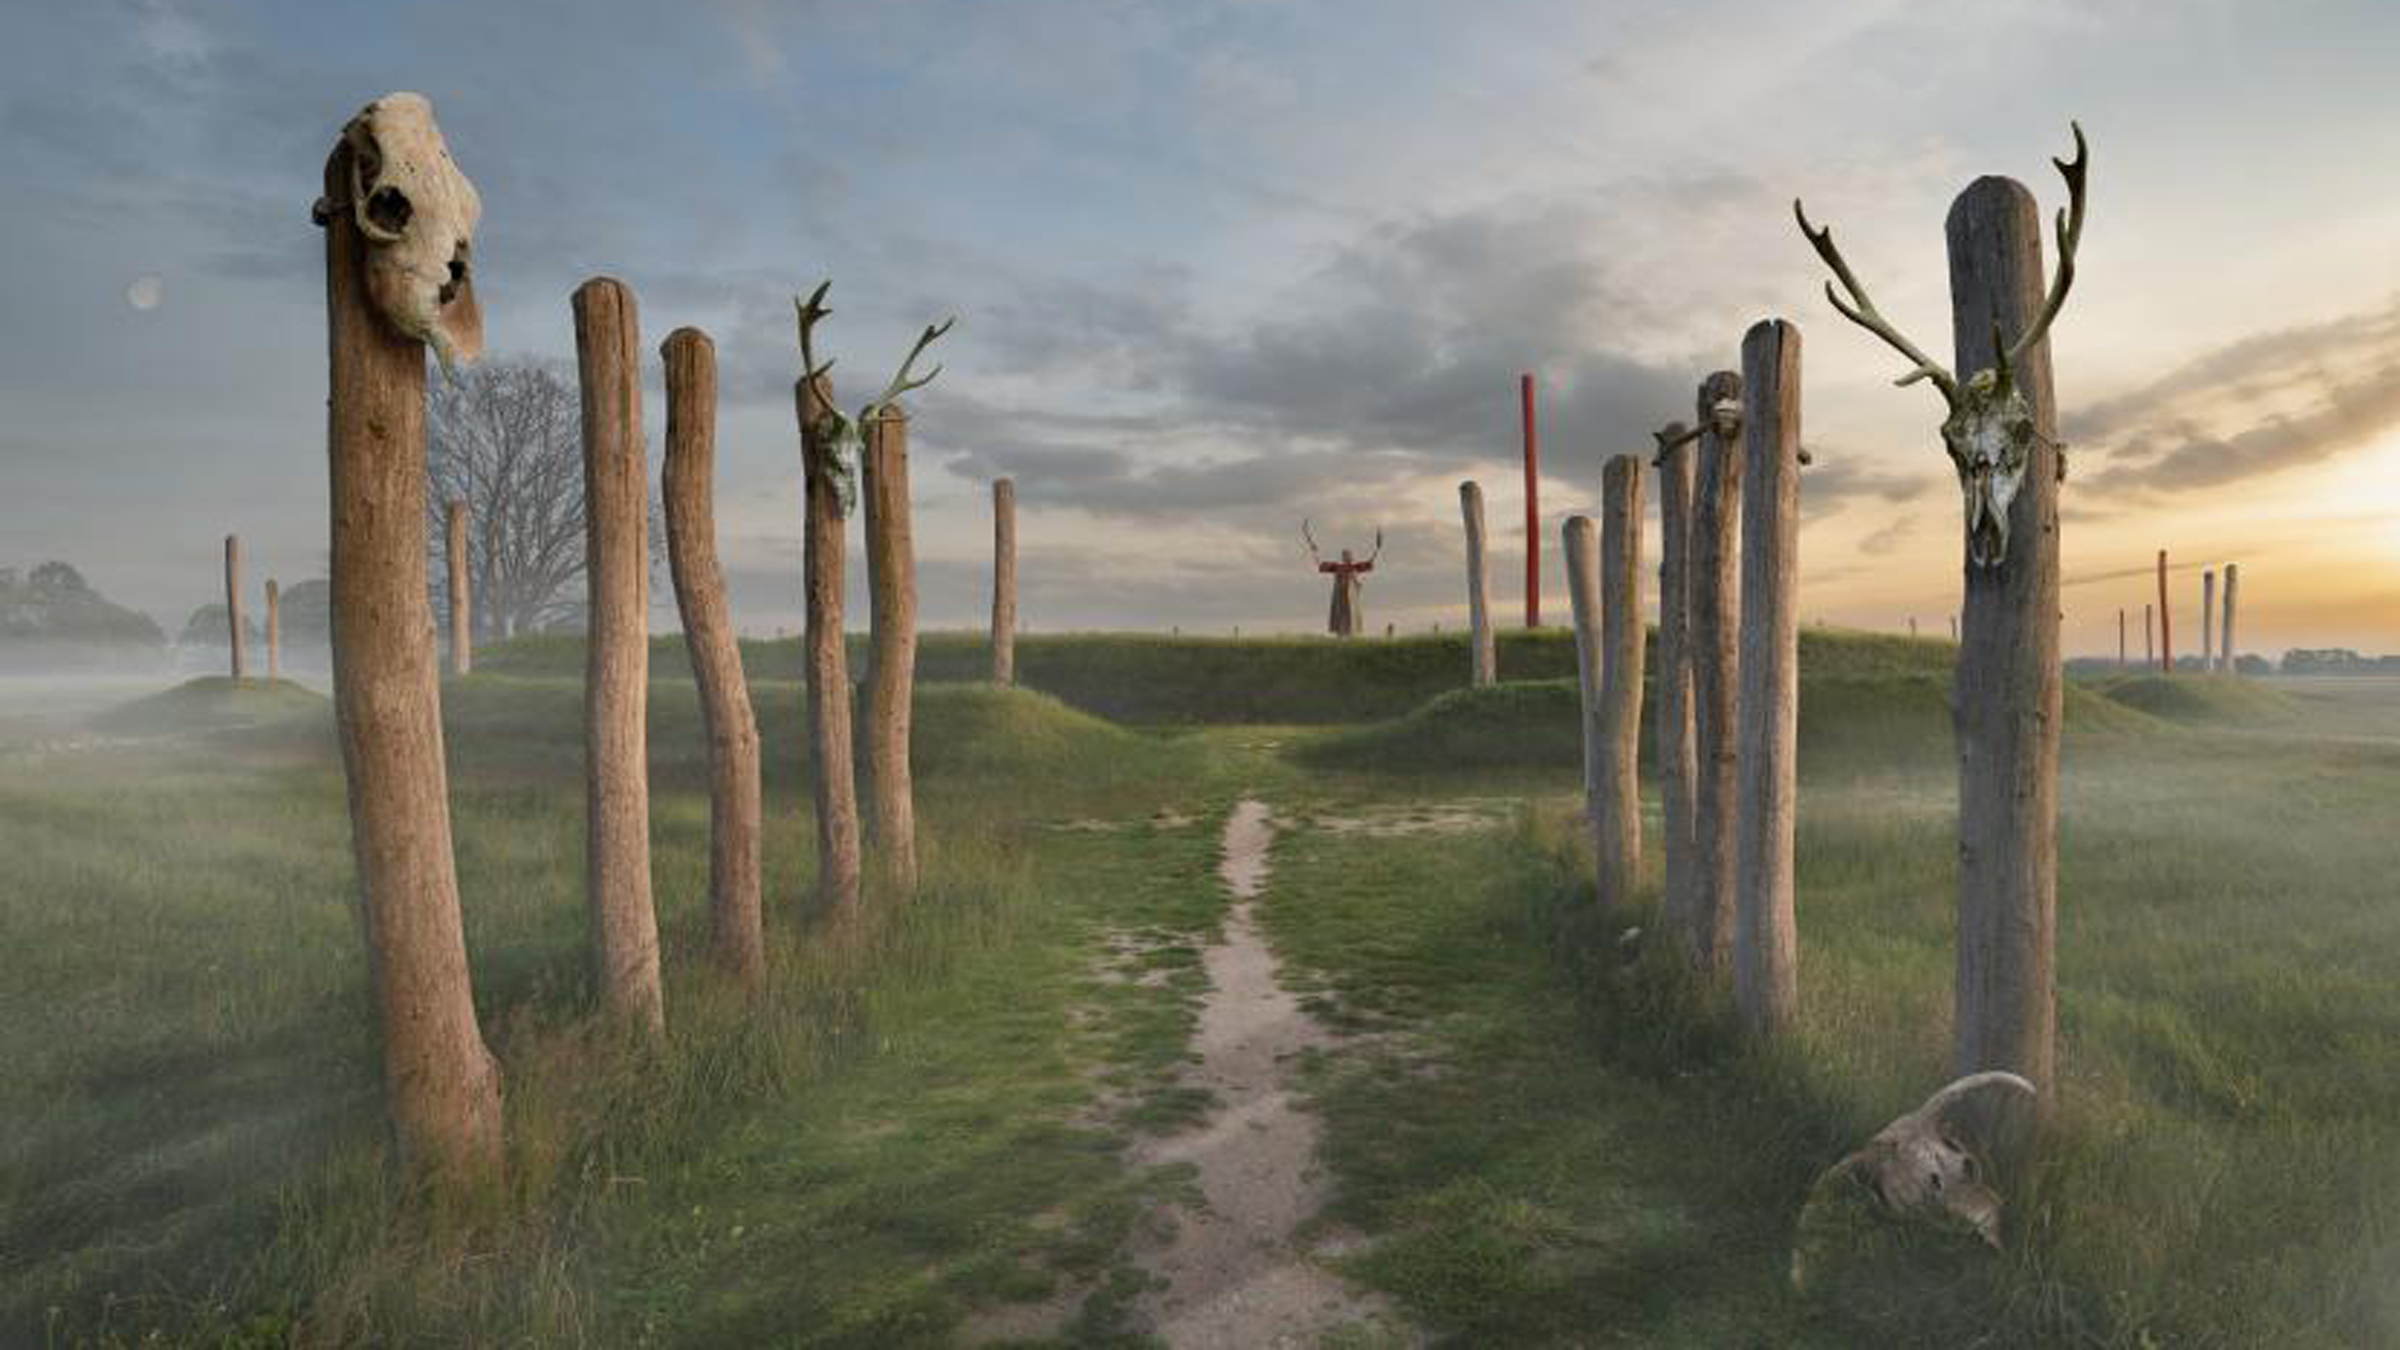 4,500-year-old 'Stonehenge' sanctuary discovered in the Netherlands